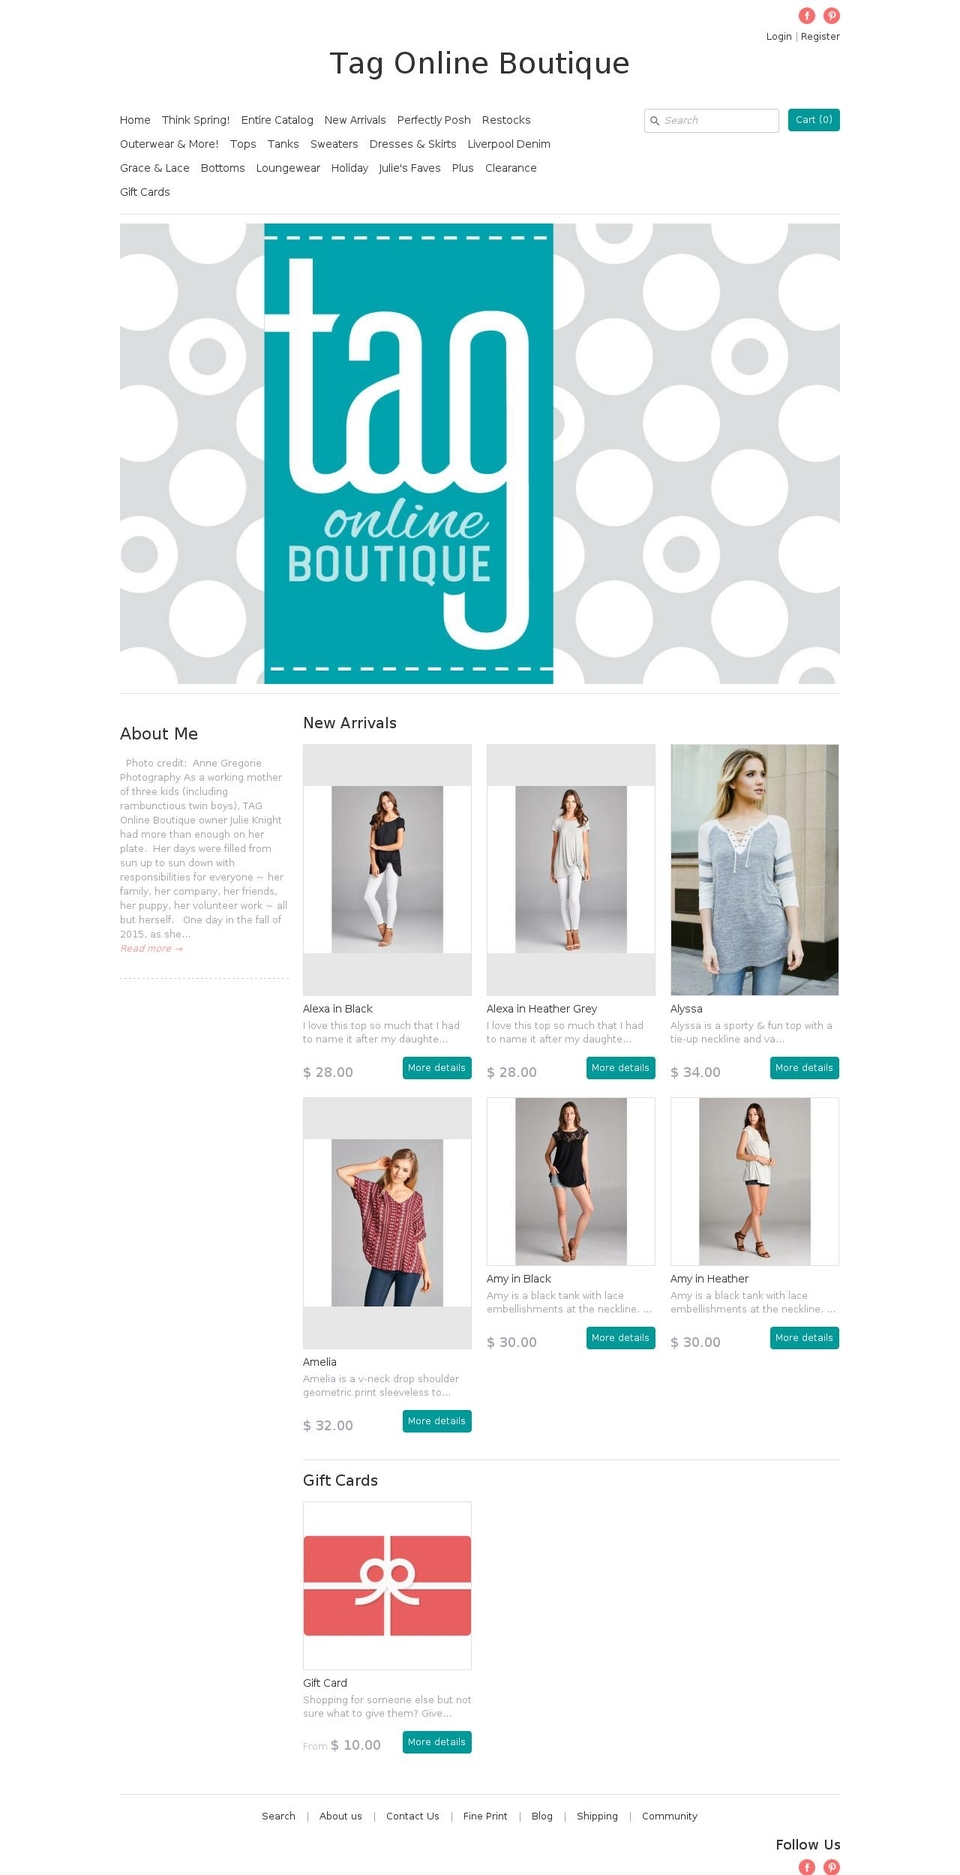 Expression Shopify theme site example tagonlineboutique.com